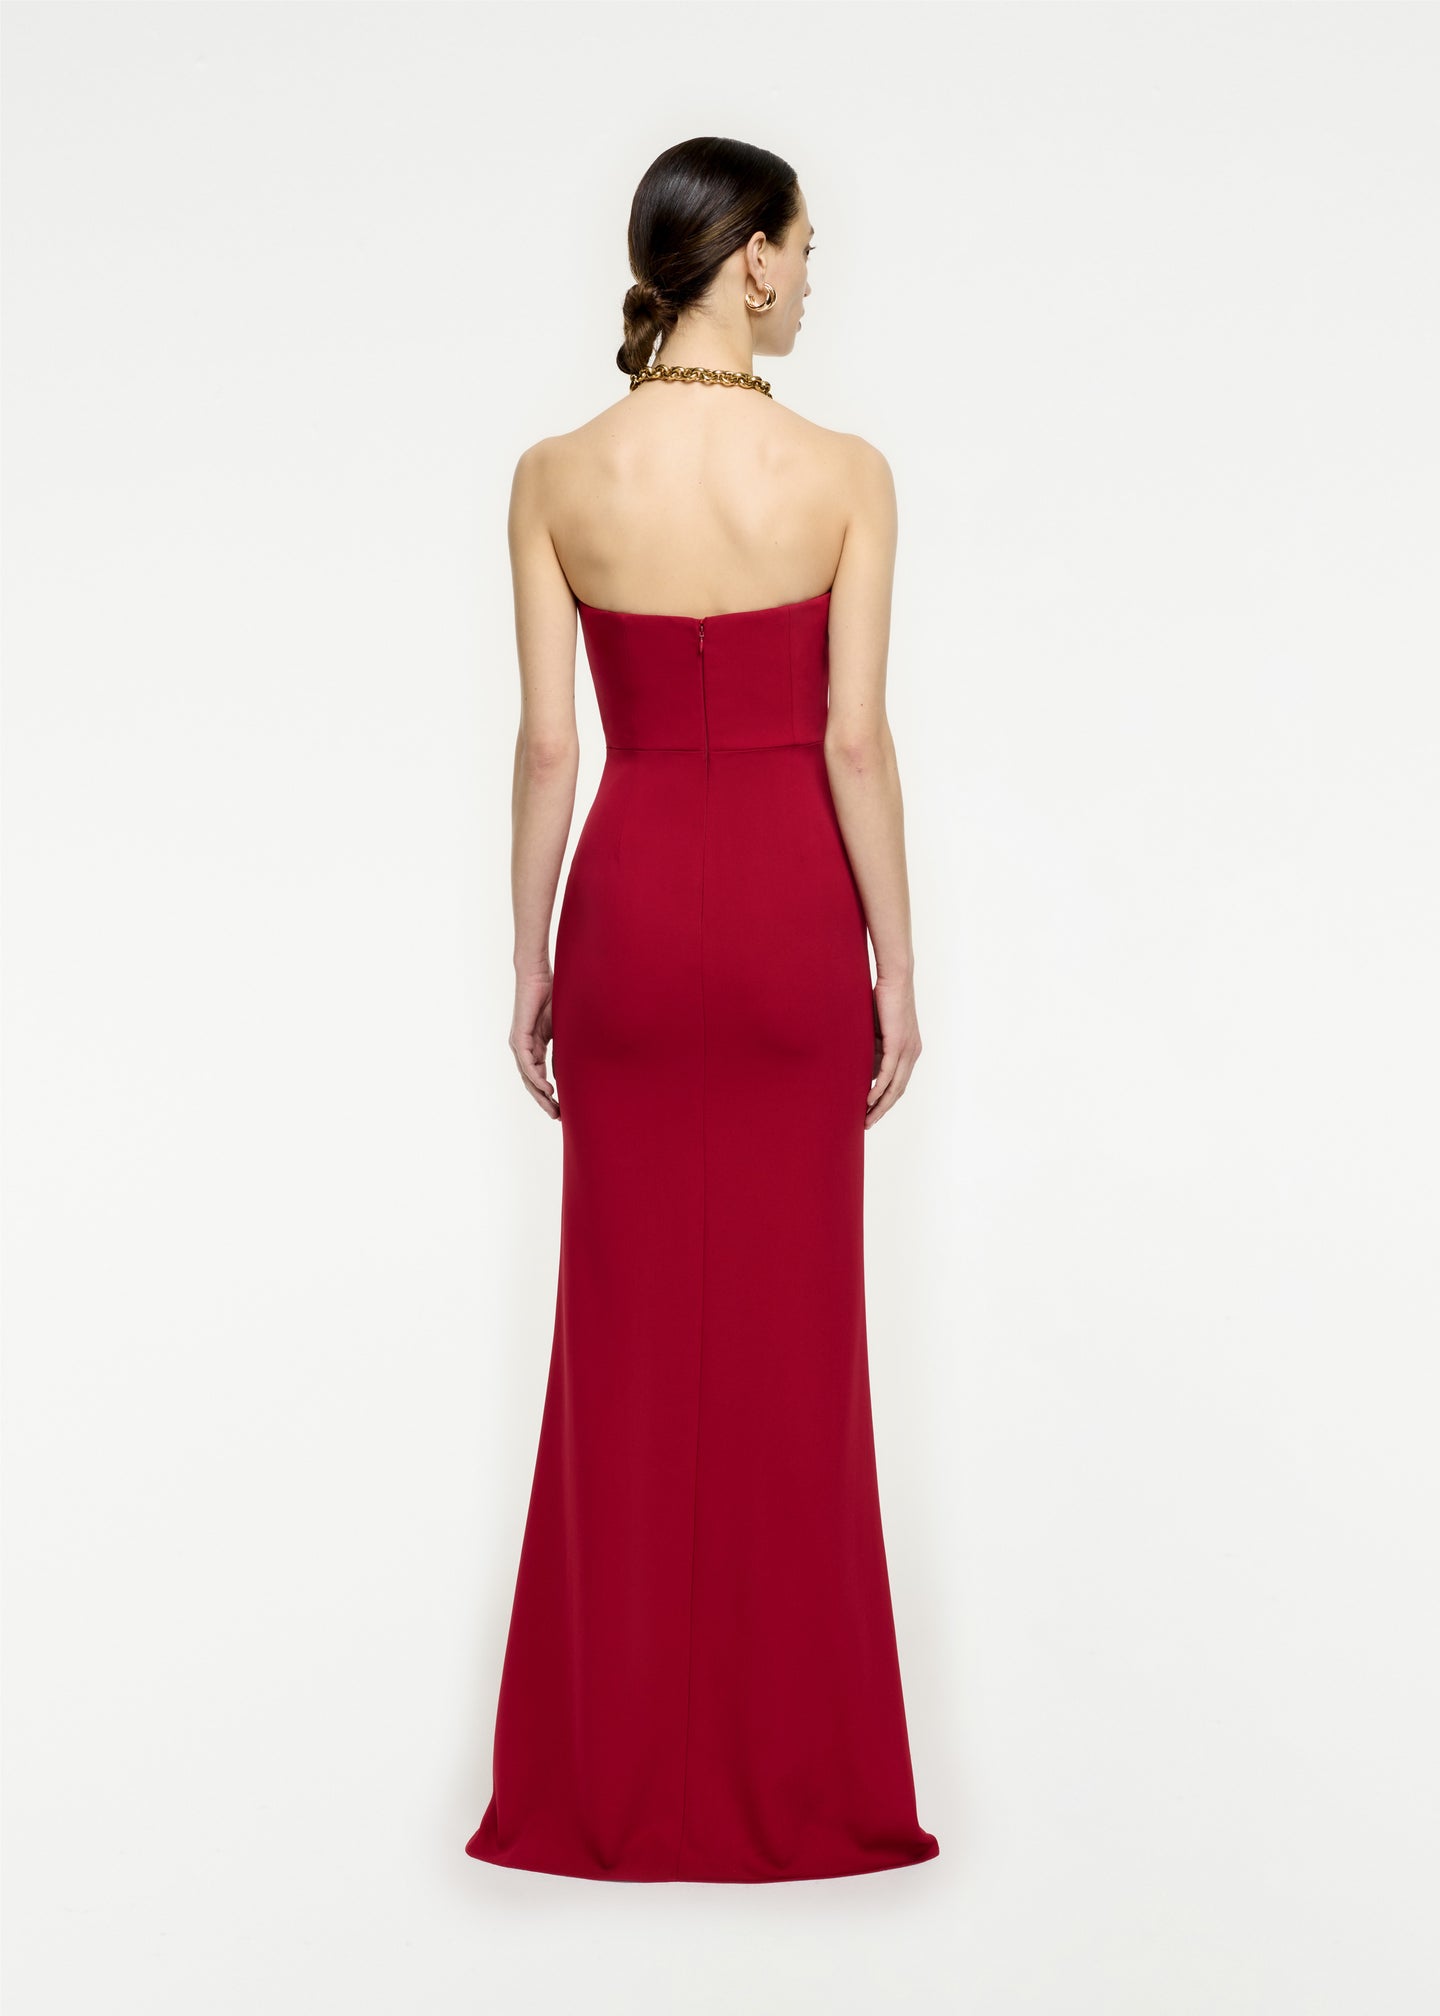 The back of a woman wearing the Strapless Stretch Cady Maxi Dress in Red